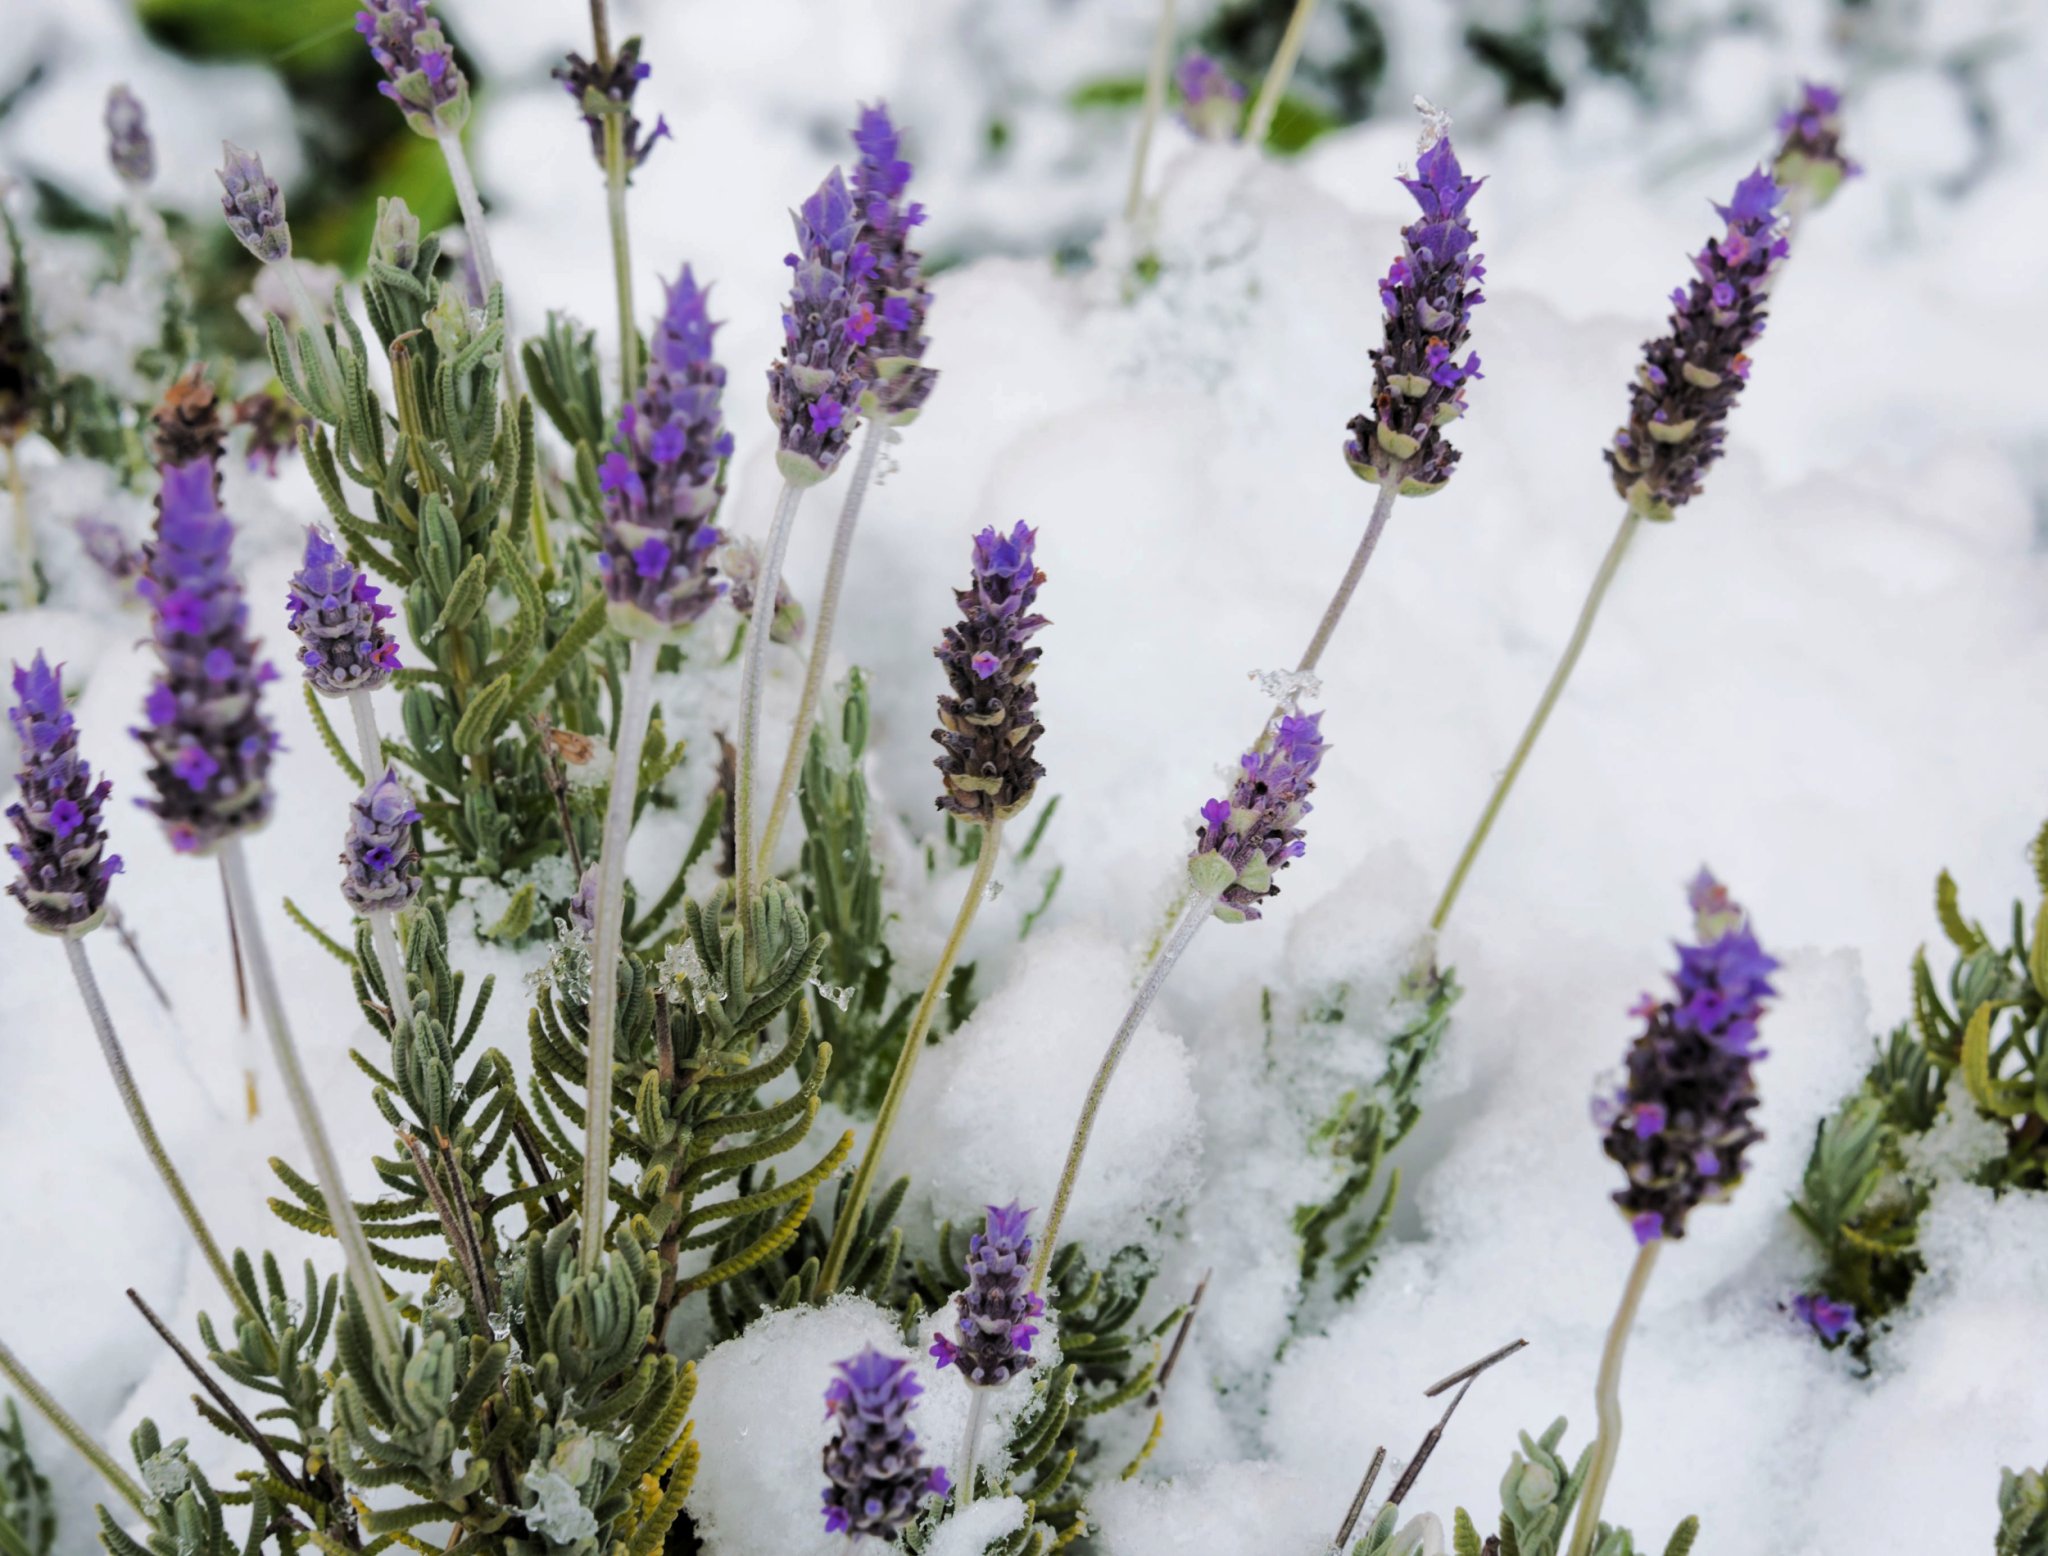 How to Care for Lavender in Winter